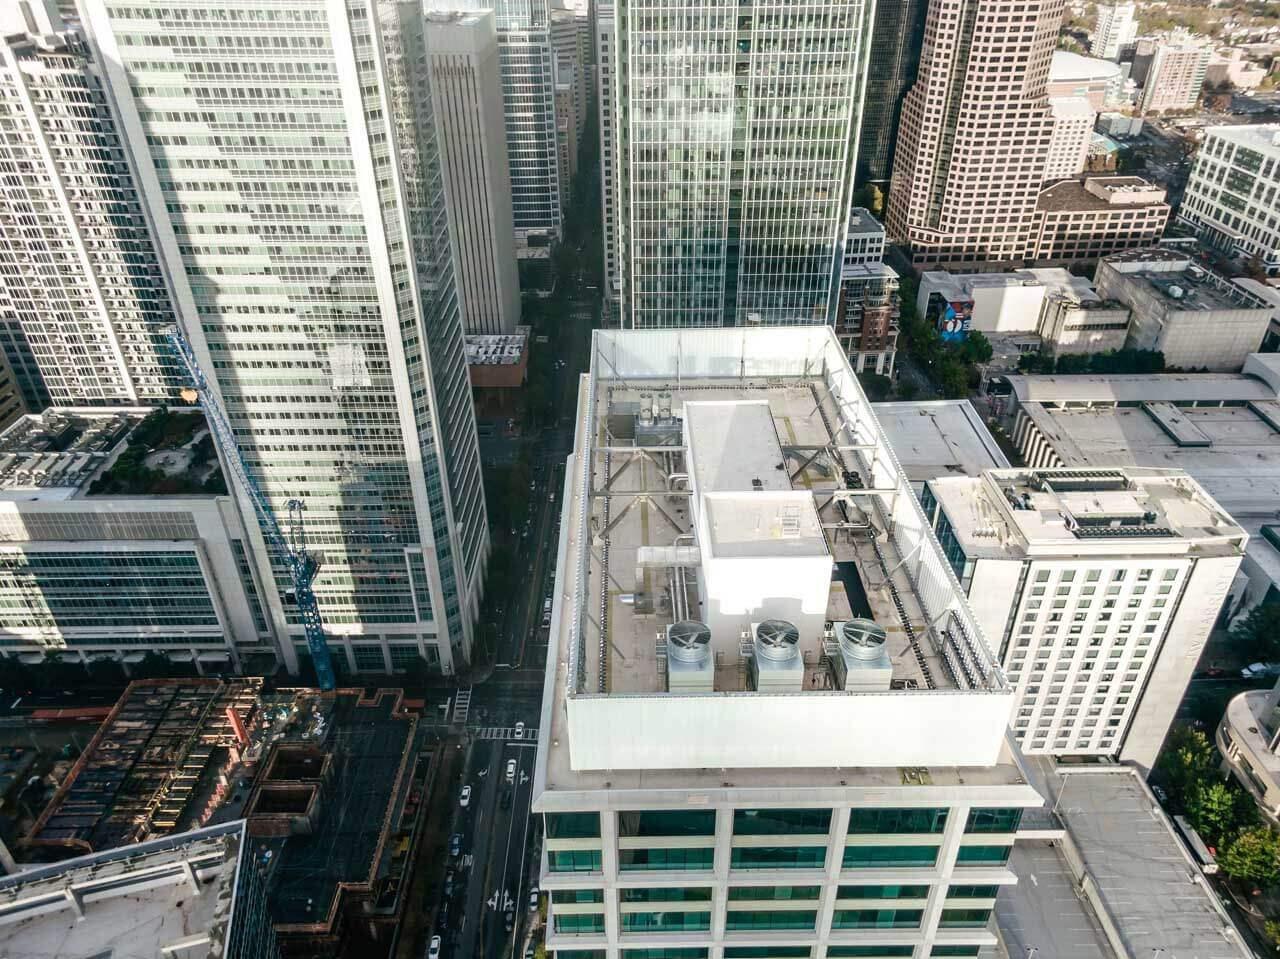 Aerial view of a building's roof in uptown Charlotte, NC.